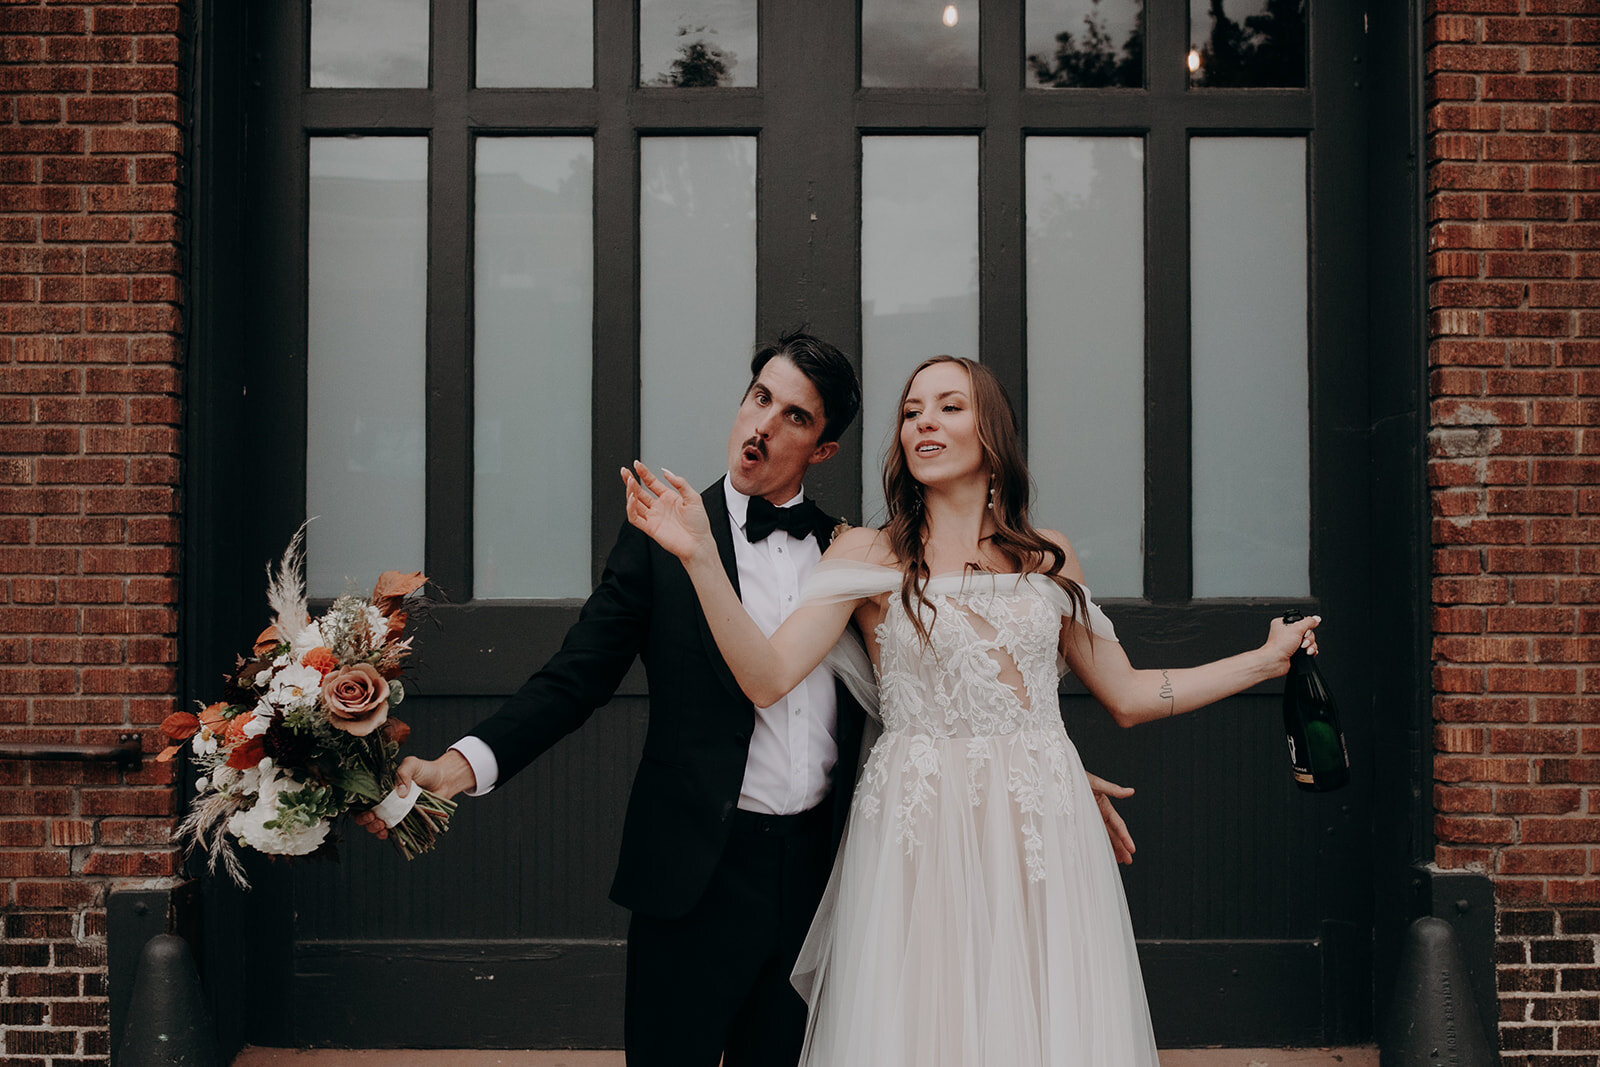 Industrial outdoor wedding portraits at the St Vrain, Boulder county wedding venue